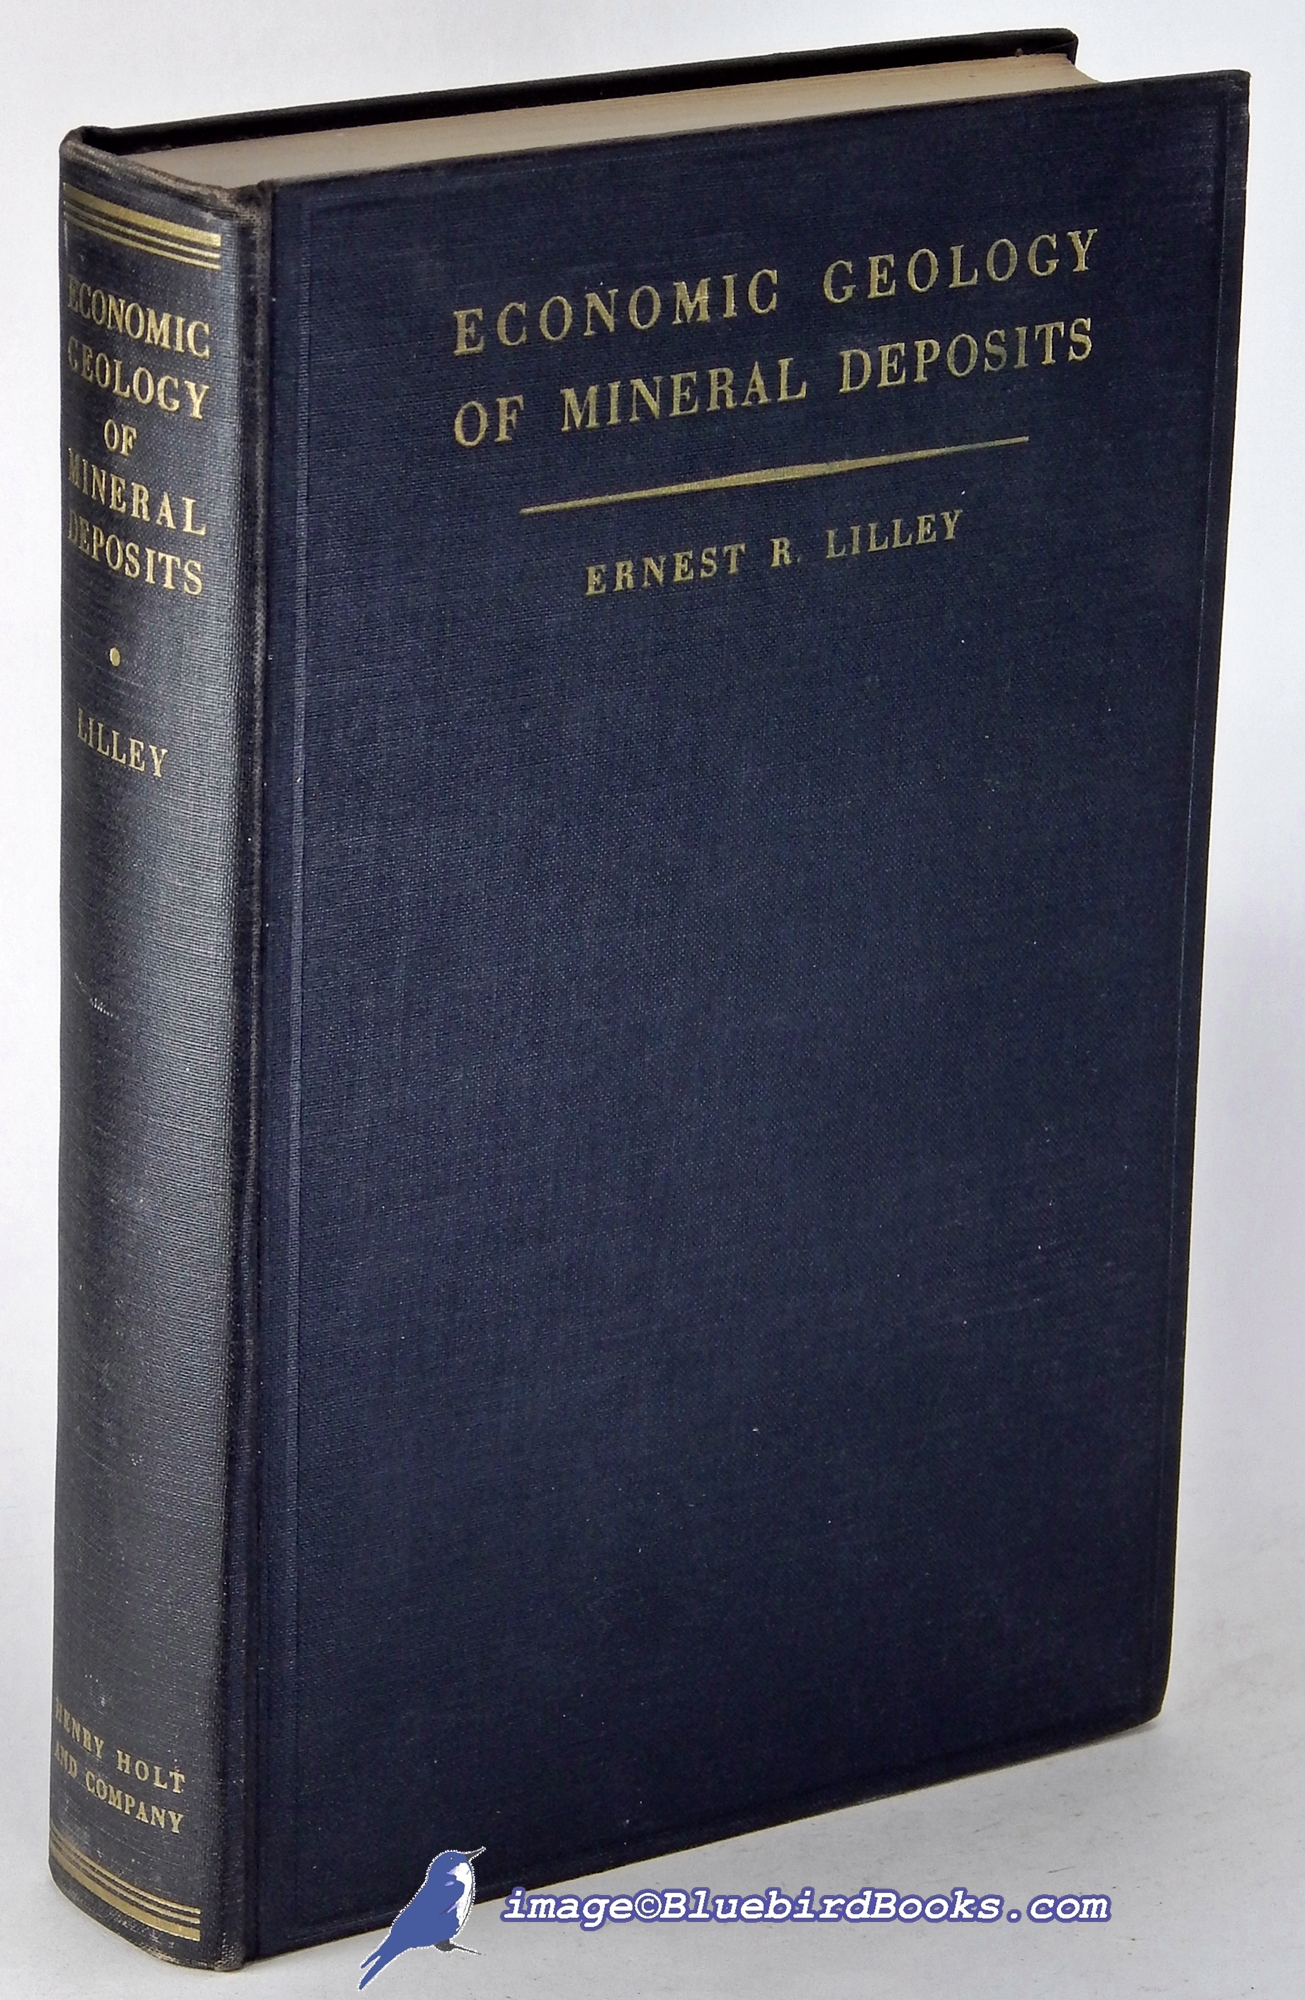 LILLEY, ERNEST R. - Economic Geology of Mineral Deposits